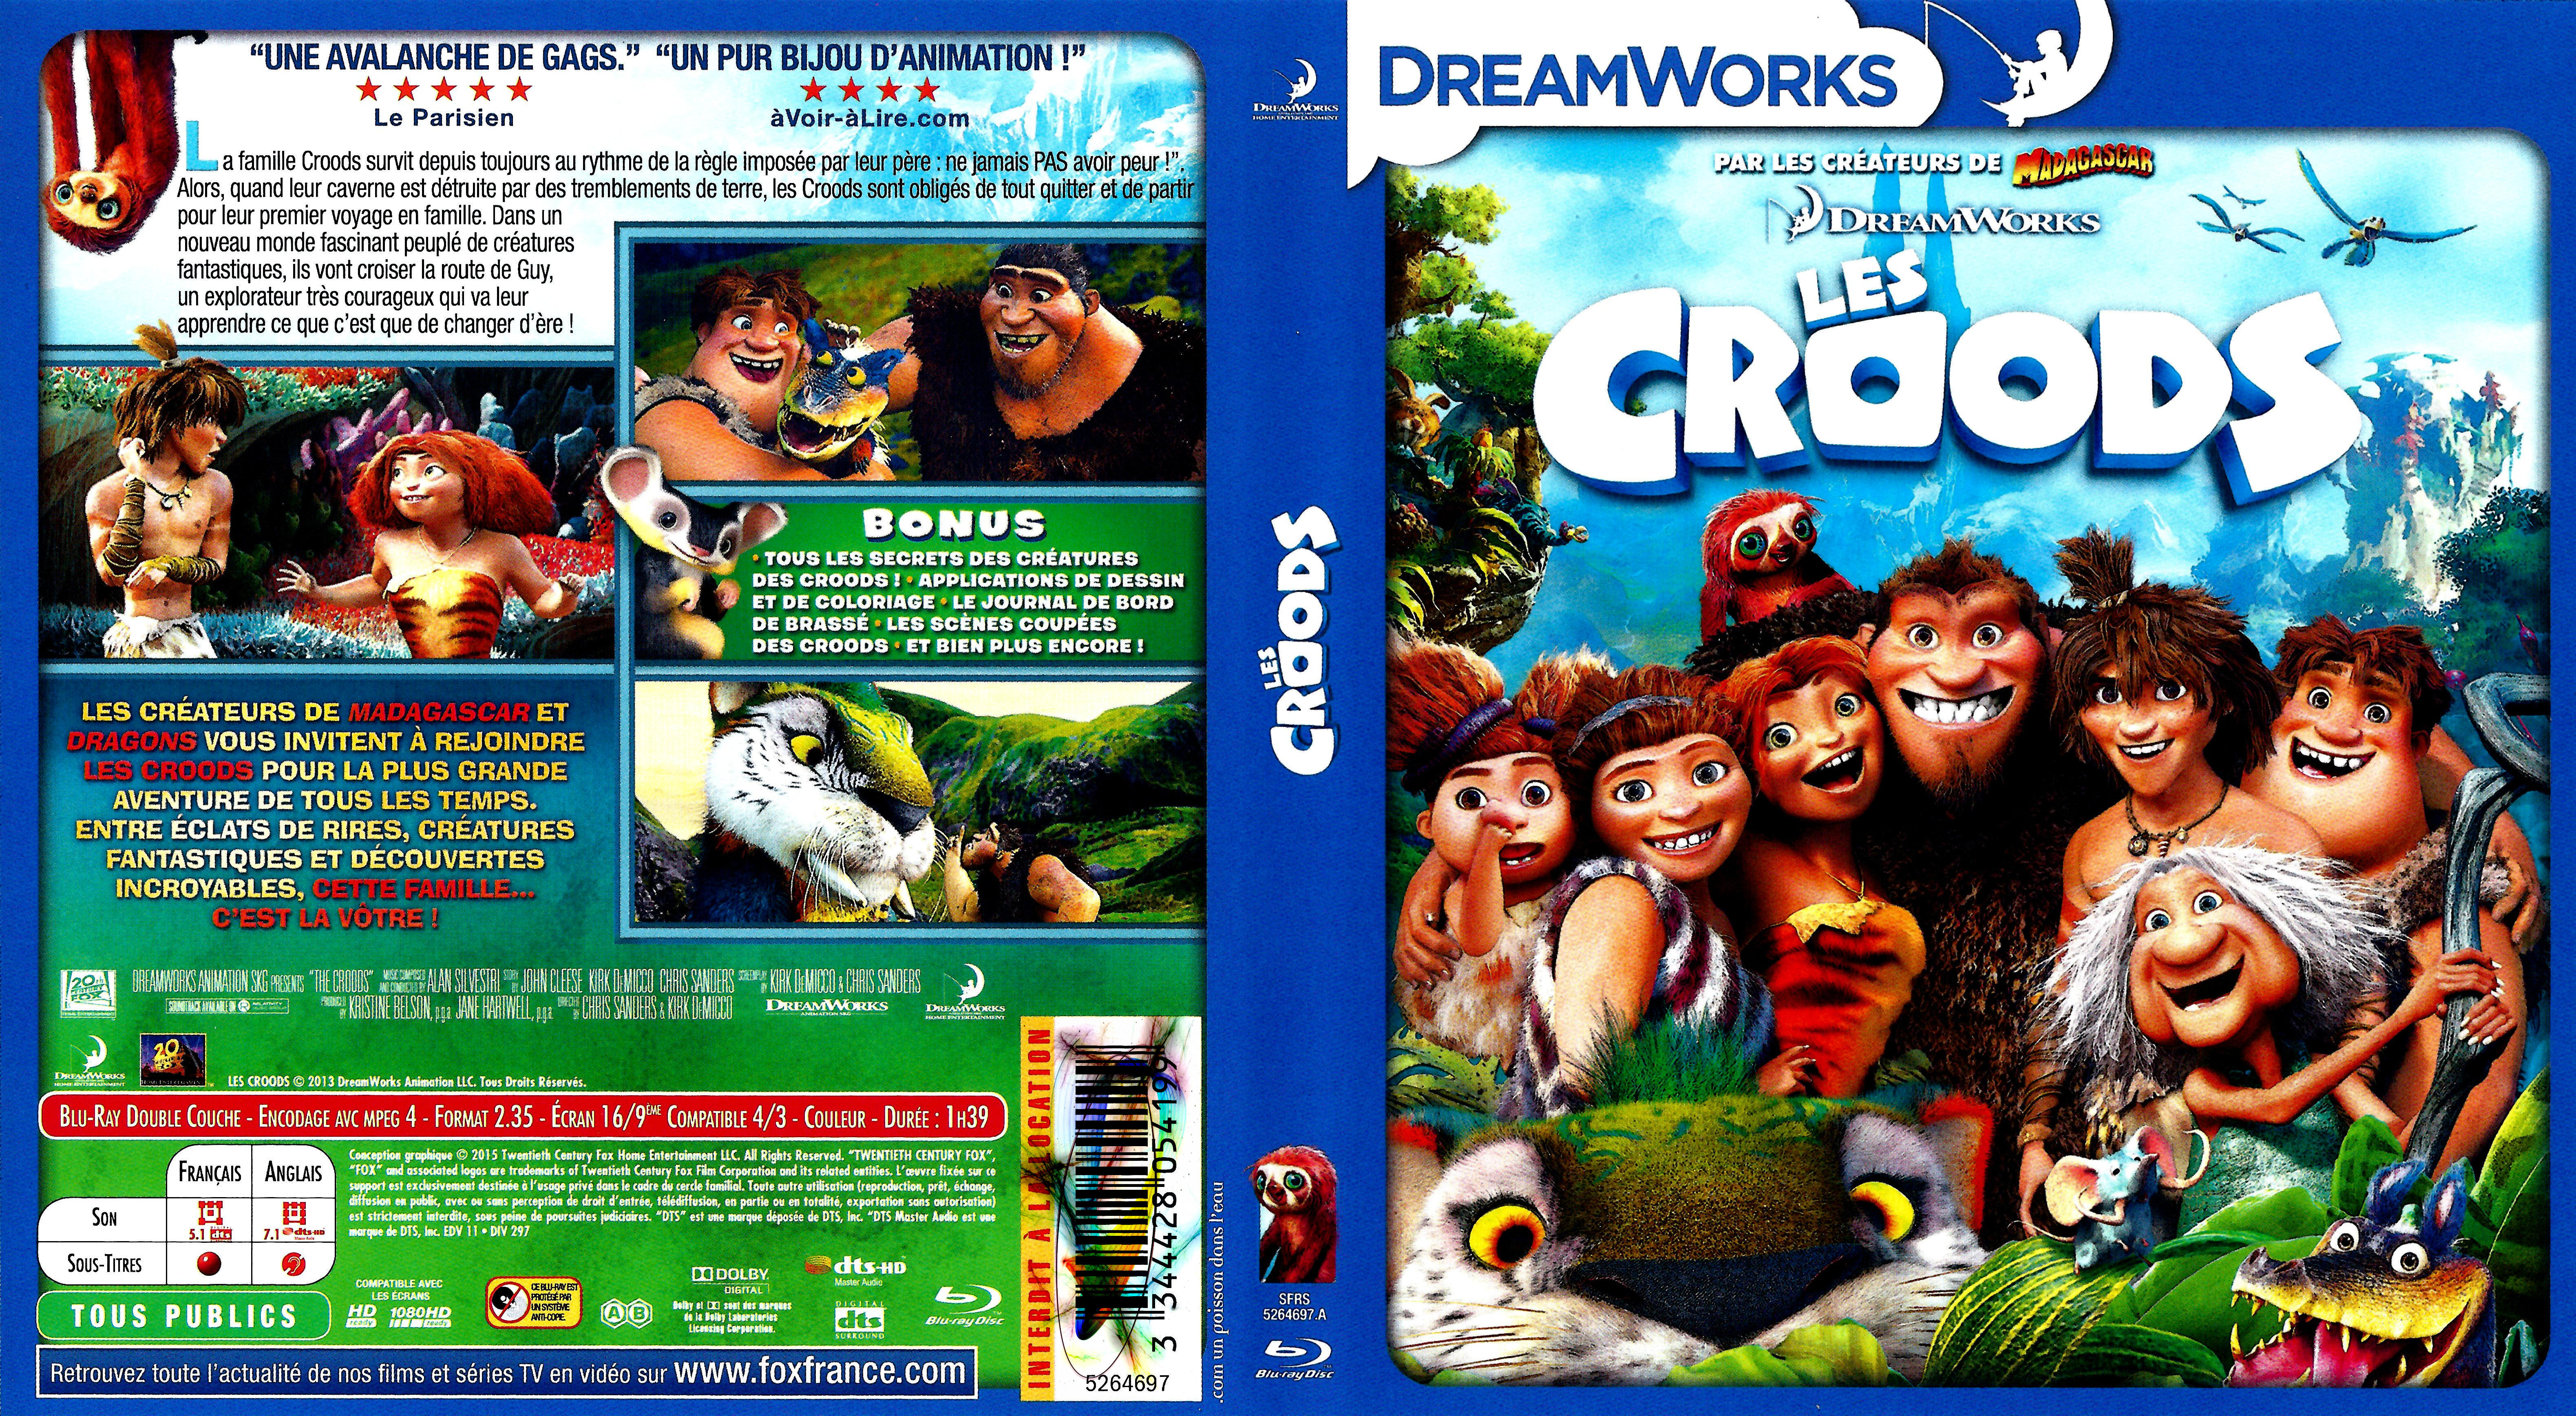 Jaquette DVD Les croods (BLU-RAY) v2